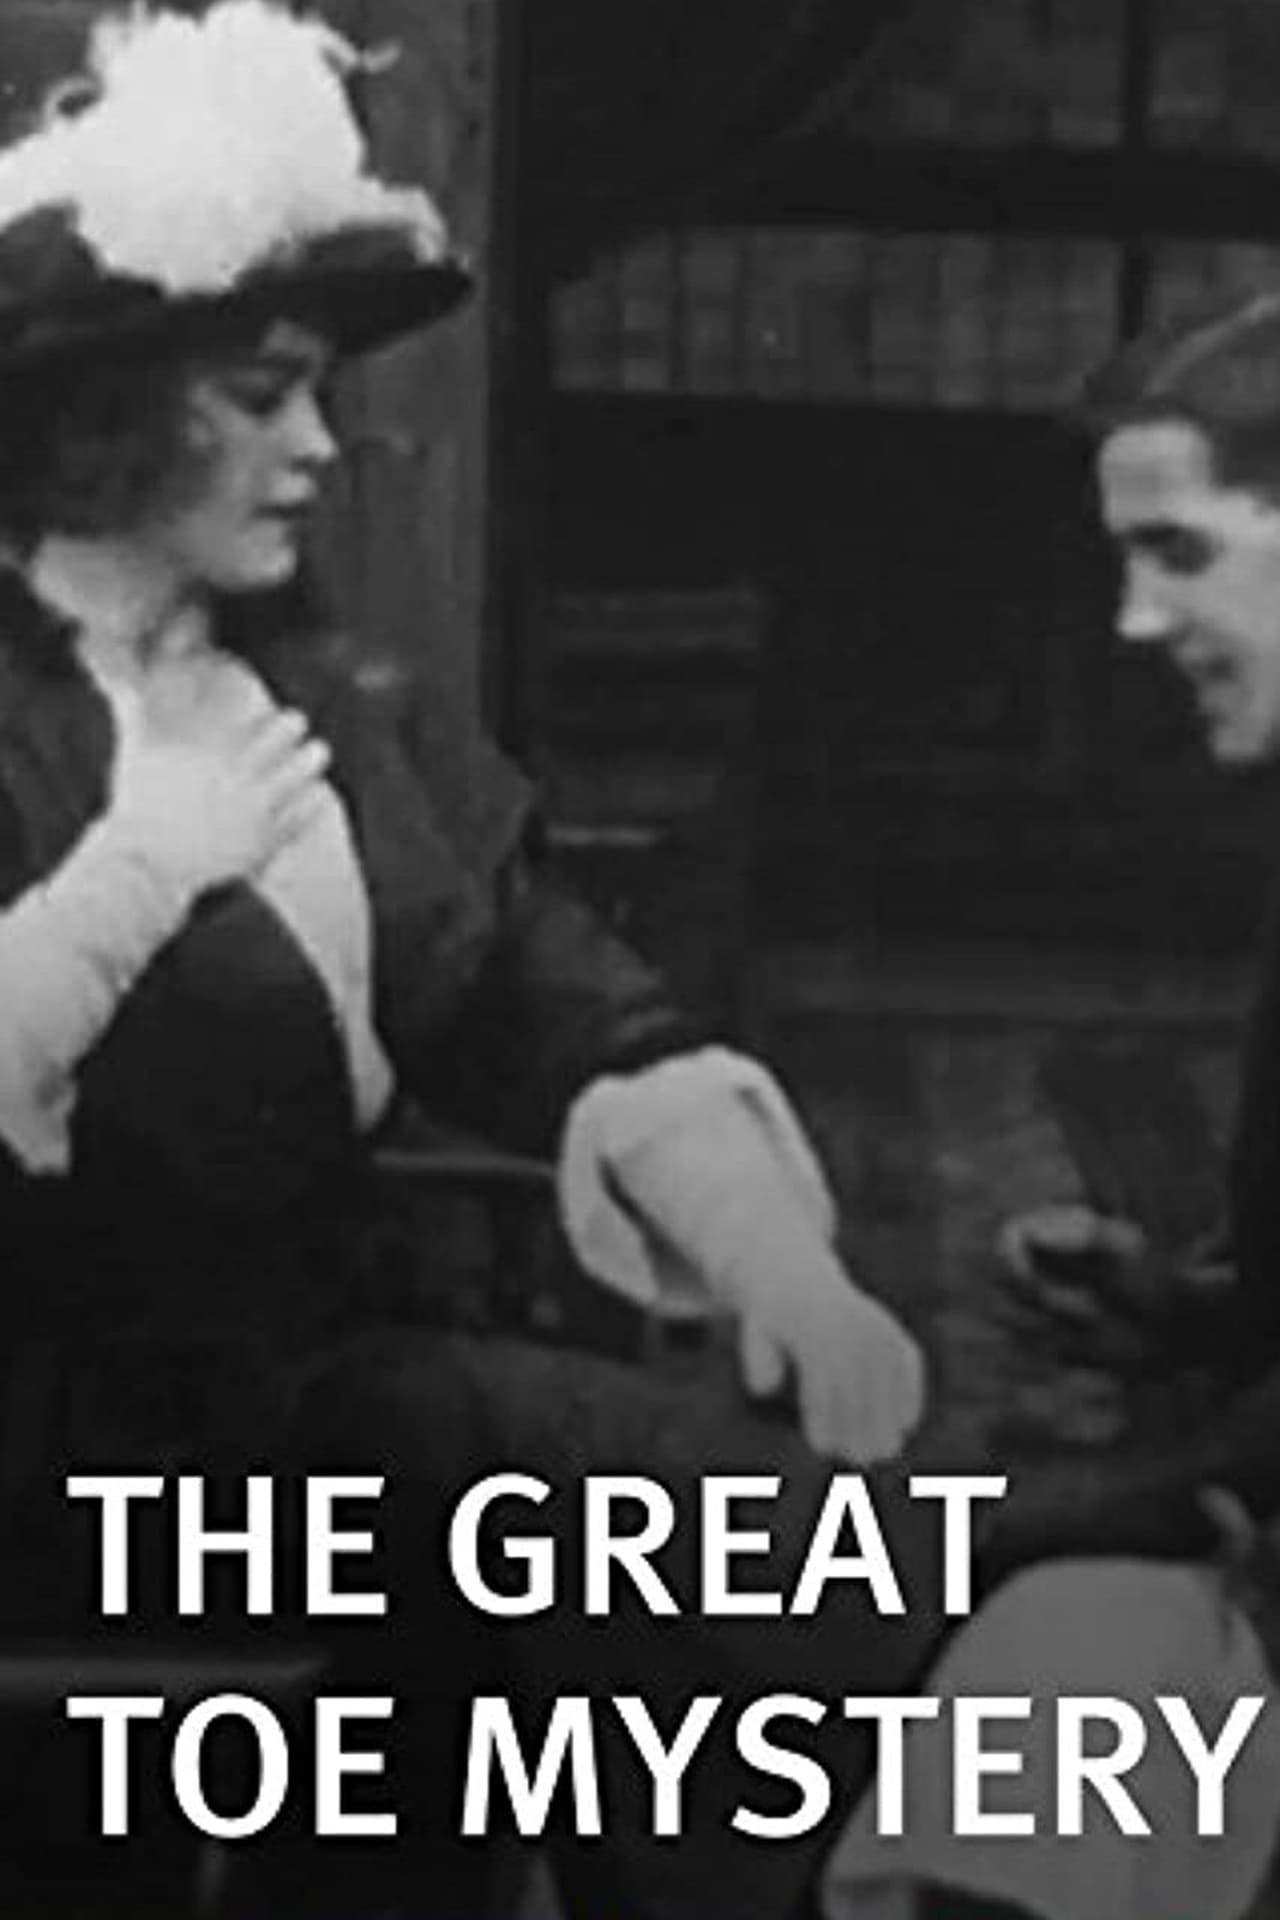 The Great Toe Mystery (1914)